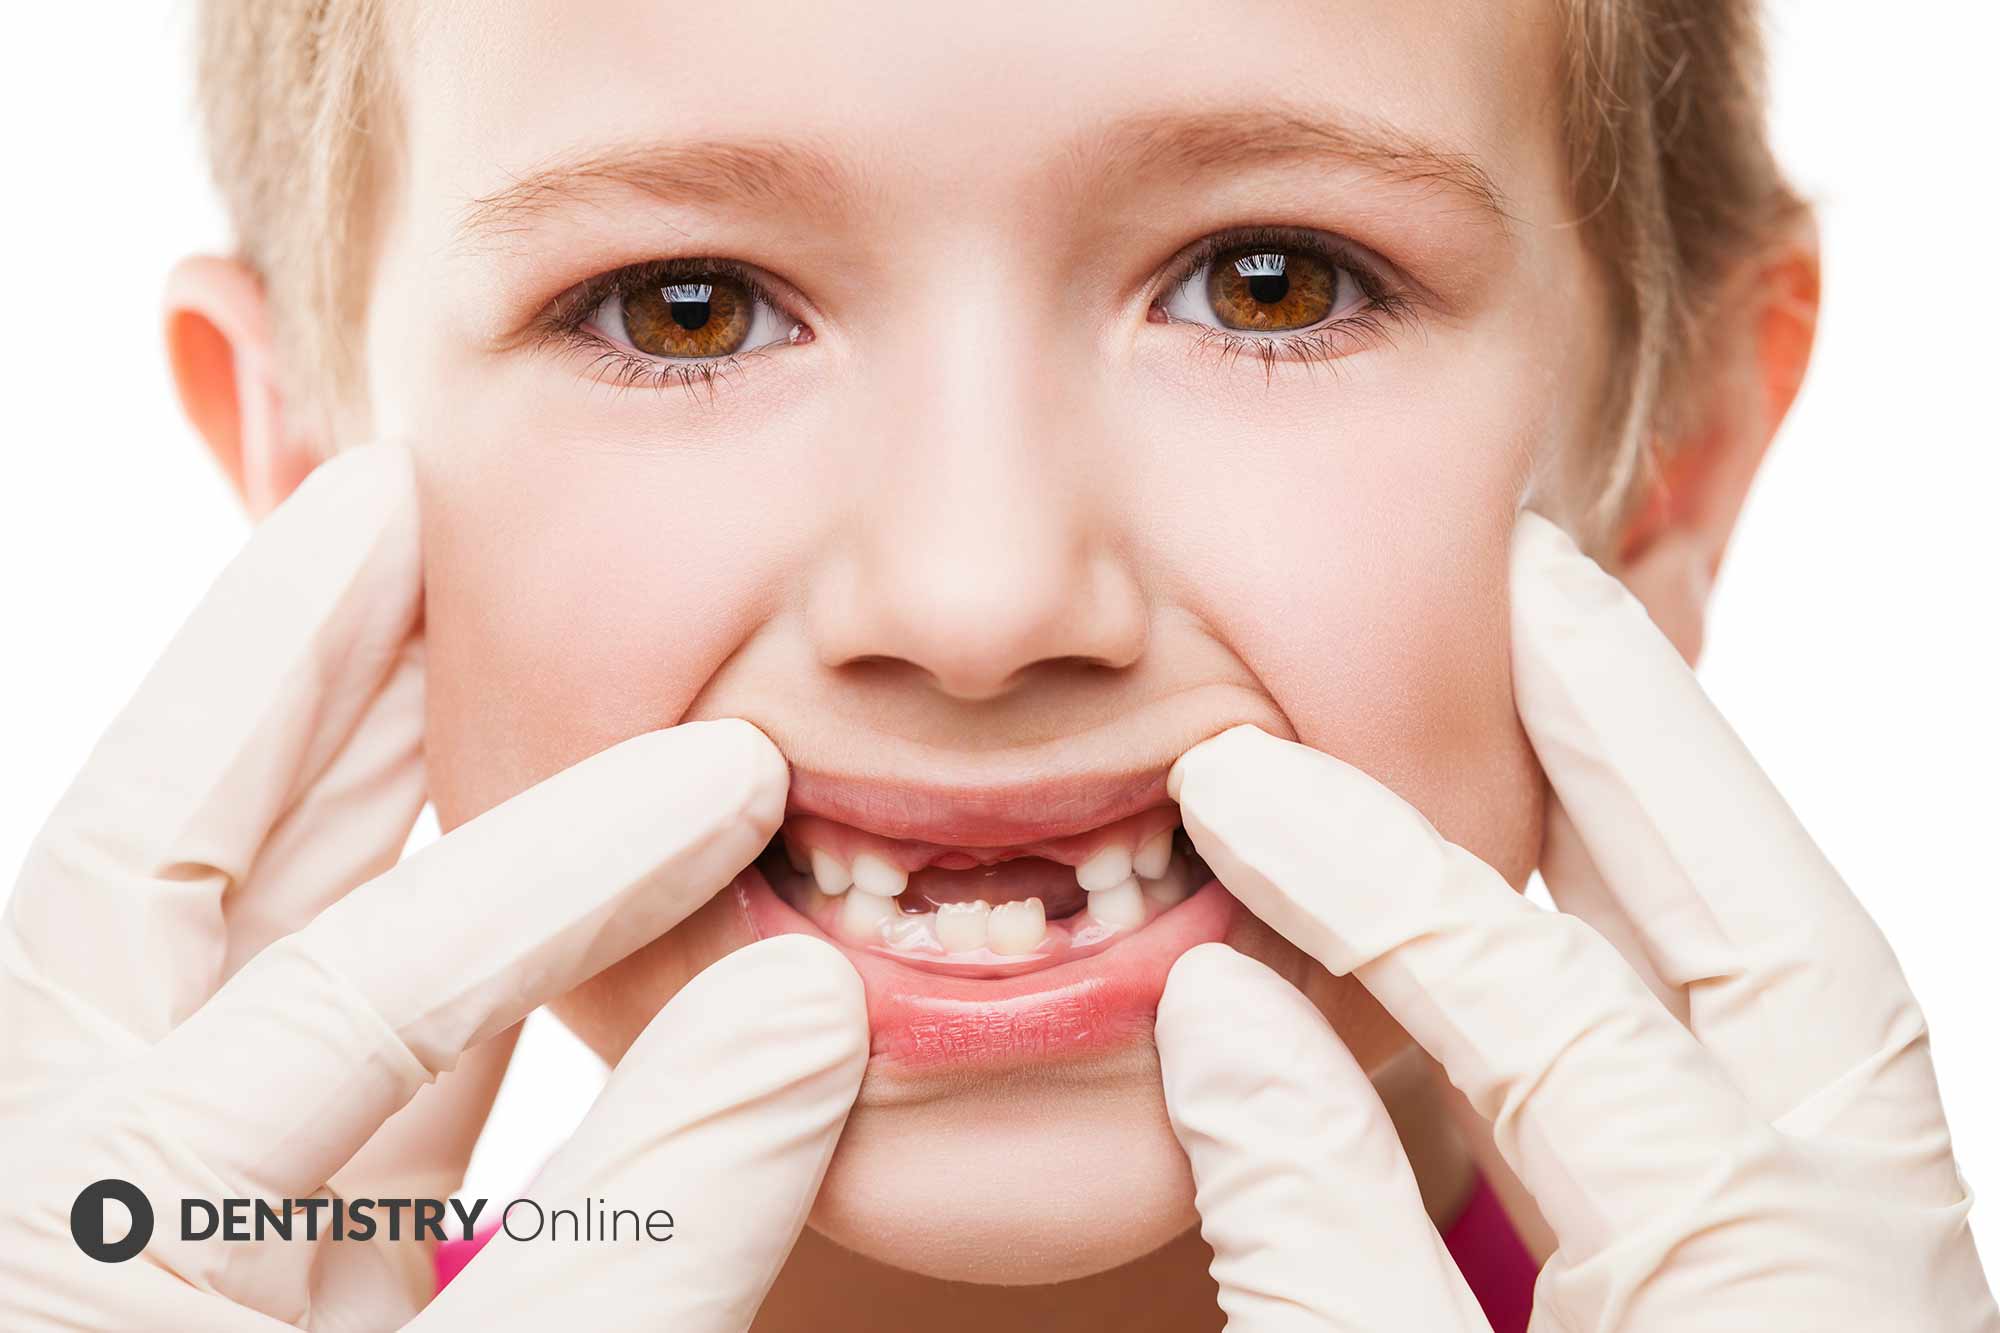 The number of dental treatments carried out on children in the UK has more than halved in the last 12 months, it has been revealed